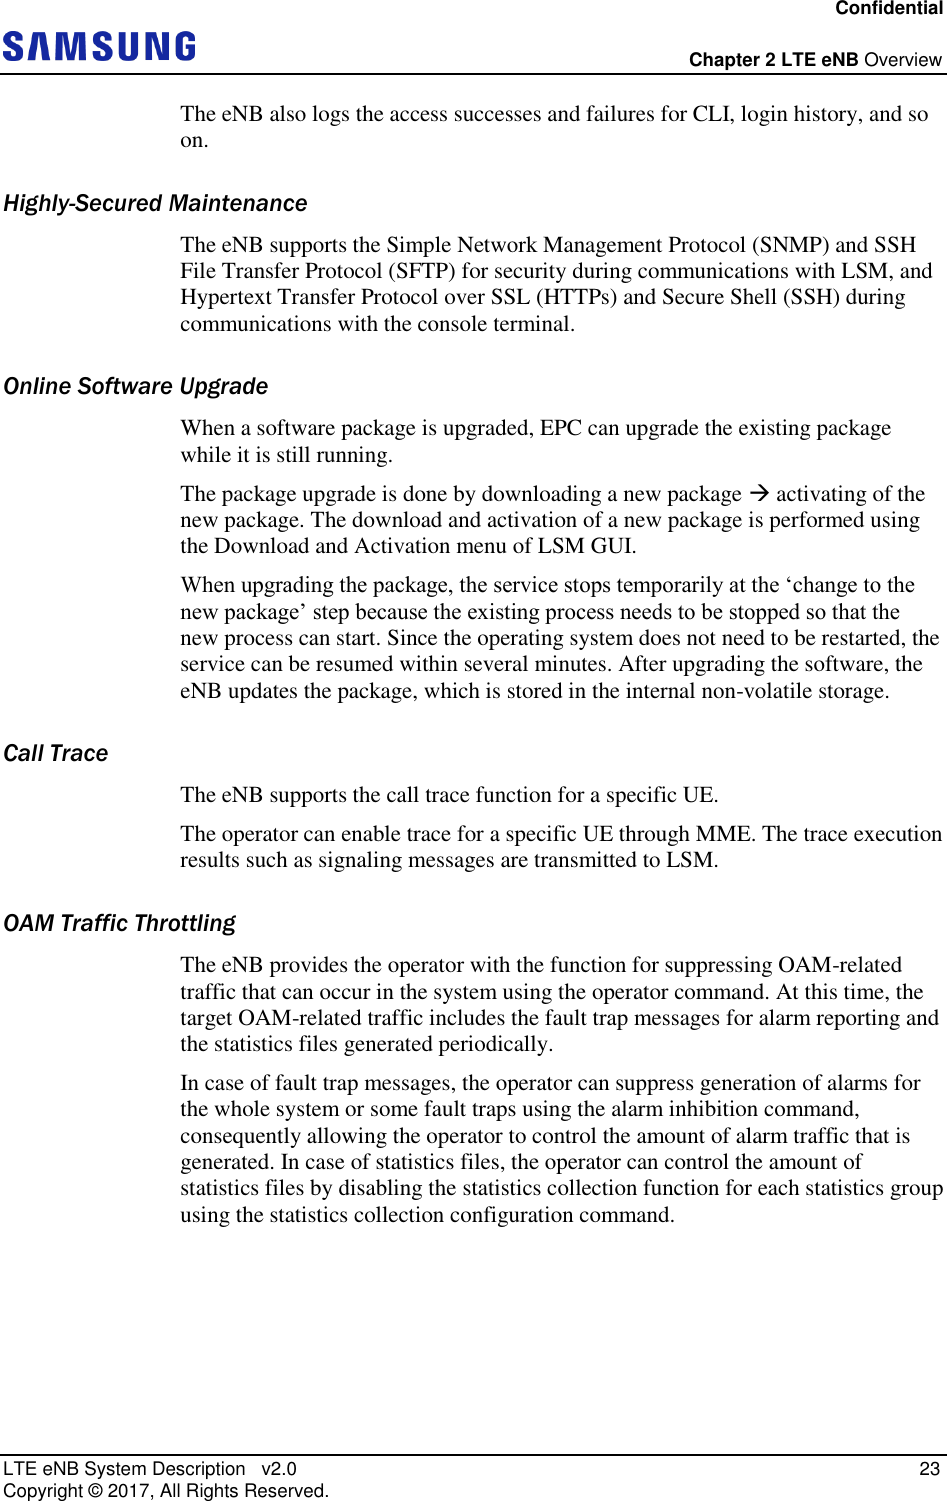 Confidential  Chapter 2 LTE eNB Overview LTE eNB System Description   v2.0   23 Copyright ©  2017, All Rights Reserved. The eNB also logs the access successes and failures for CLI, login history, and so on. Highly-Secured Maintenance The eNB supports the Simple Network Management Protocol (SNMP) and SSH File Transfer Protocol (SFTP) for security during communications with LSM, and Hypertext Transfer Protocol over SSL (HTTPs) and Secure Shell (SSH) during communications with the console terminal. Online Software Upgrade When a software package is upgraded, EPC can upgrade the existing package while it is still running. The package upgrade is done by downloading a new package  activating of the new package. The download and activation of a new package is performed using the Download and Activation menu of LSM GUI. When upgrading the package, the service stops temporarily at the ‘change to the new package’ step because the existing process needs to be stopped so that the new process can start. Since the operating system does not need to be restarted, the service can be resumed within several minutes. After upgrading the software, the eNB updates the package, which is stored in the internal non-volatile storage. Call Trace The eNB supports the call trace function for a specific UE. The operator can enable trace for a specific UE through MME. The trace execution results such as signaling messages are transmitted to LSM. OAM Traffic Throttling The eNB provides the operator with the function for suppressing OAM-related traffic that can occur in the system using the operator command. At this time, the target OAM-related traffic includes the fault trap messages for alarm reporting and the statistics files generated periodically. In case of fault trap messages, the operator can suppress generation of alarms for the whole system or some fault traps using the alarm inhibition command, consequently allowing the operator to control the amount of alarm traffic that is generated. In case of statistics files, the operator can control the amount of statistics files by disabling the statistics collection function for each statistics group using the statistics collection configuration command.    